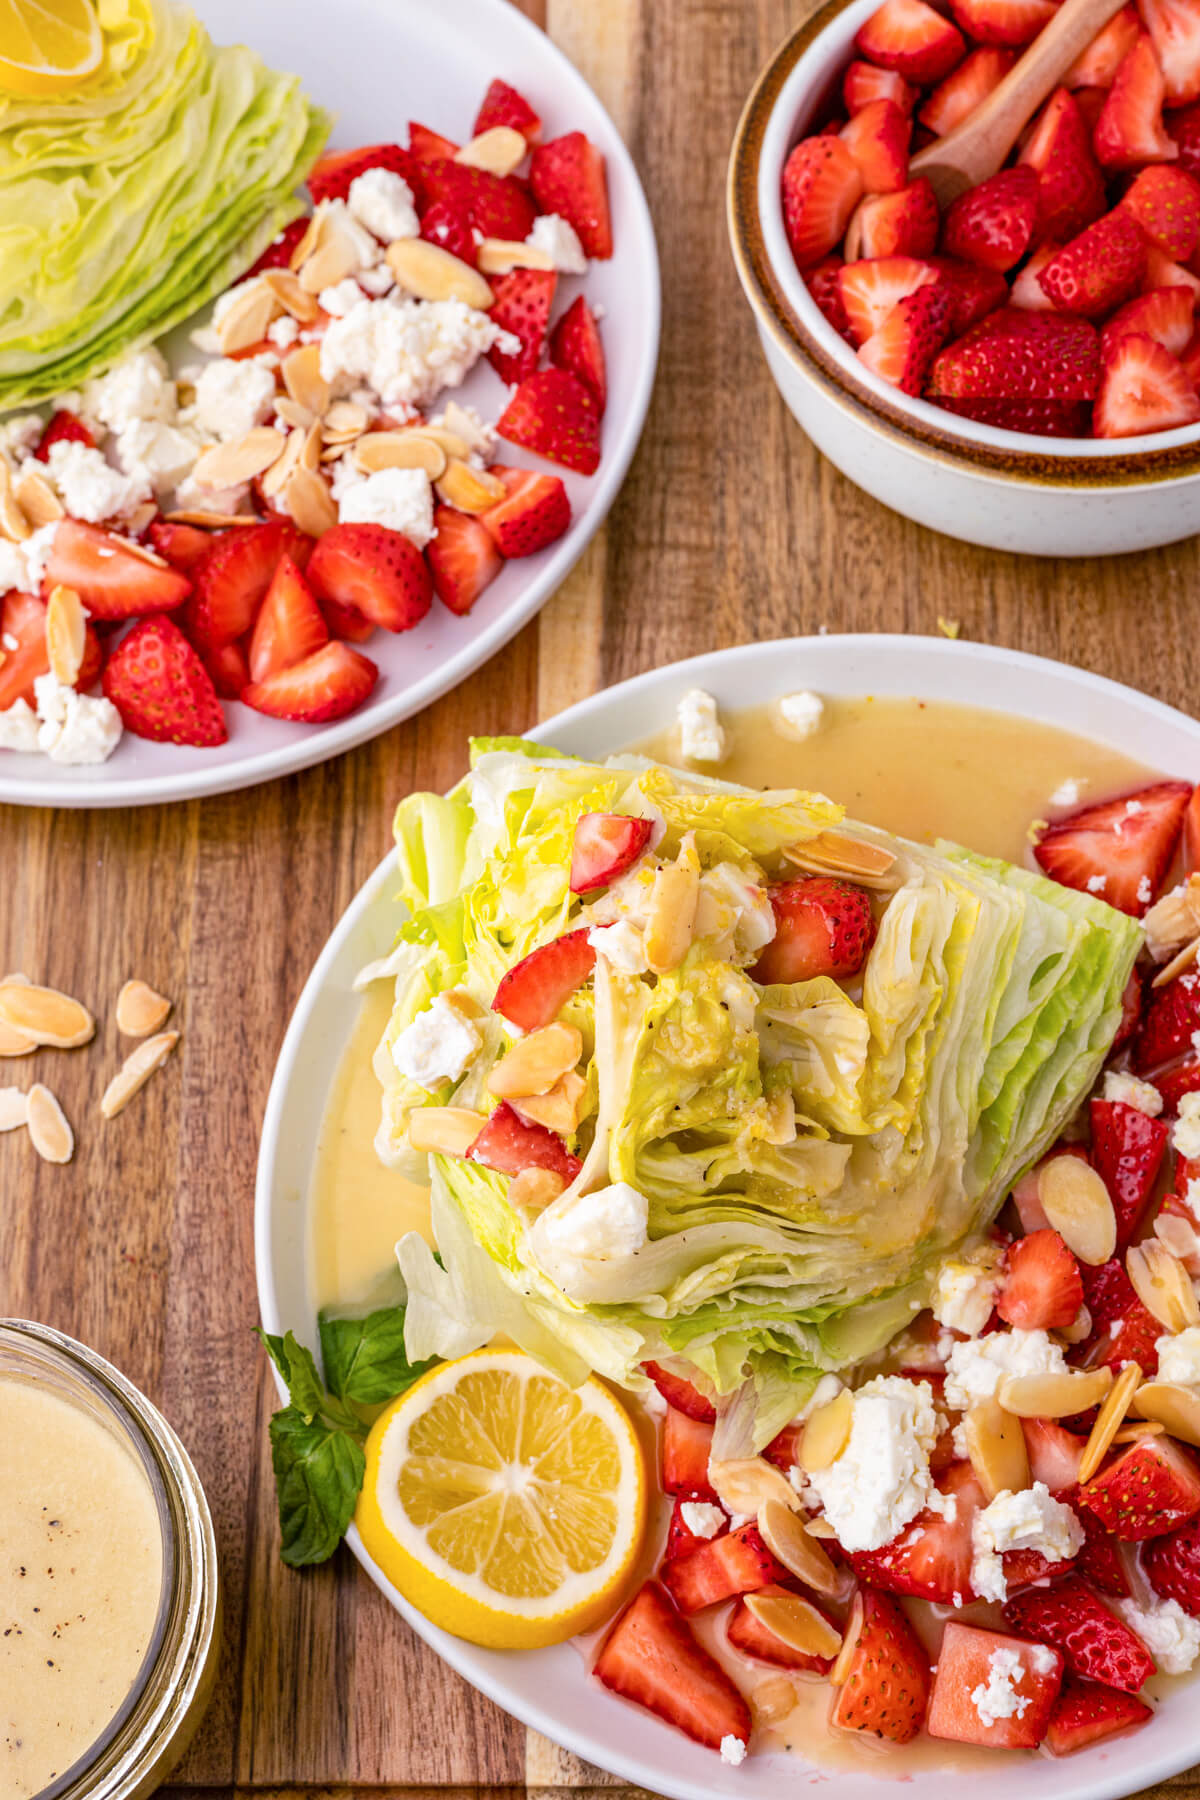 Two strawberry Feta Wedge Salads on white plates on a wooden table.
